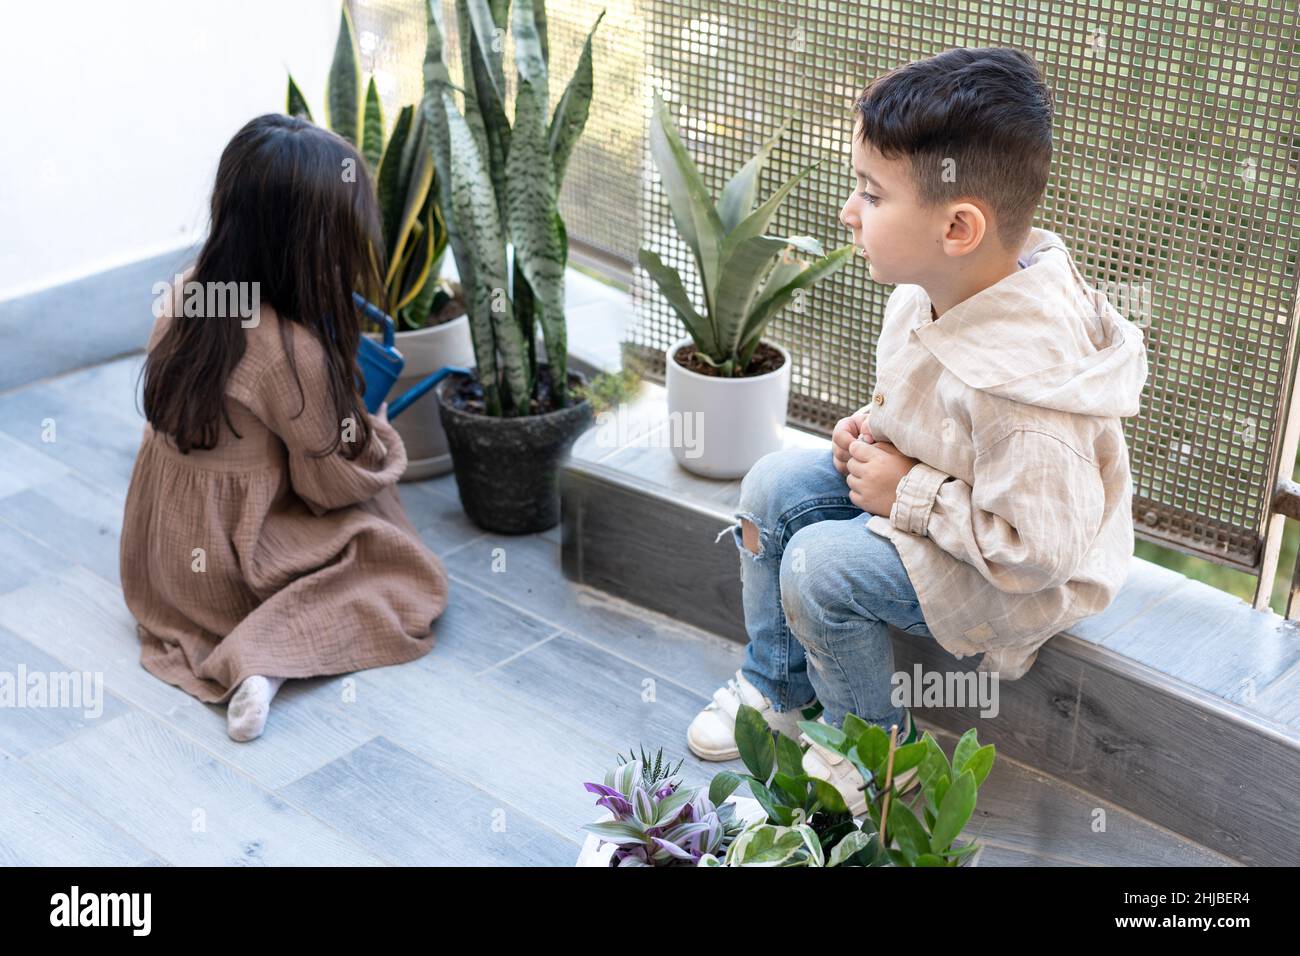 Boy and girl gardening. Little girl is watering flowers on the balcony at home. Indoor care, biophilia design and love for house plants. Selective focus on boy. Stock Photo